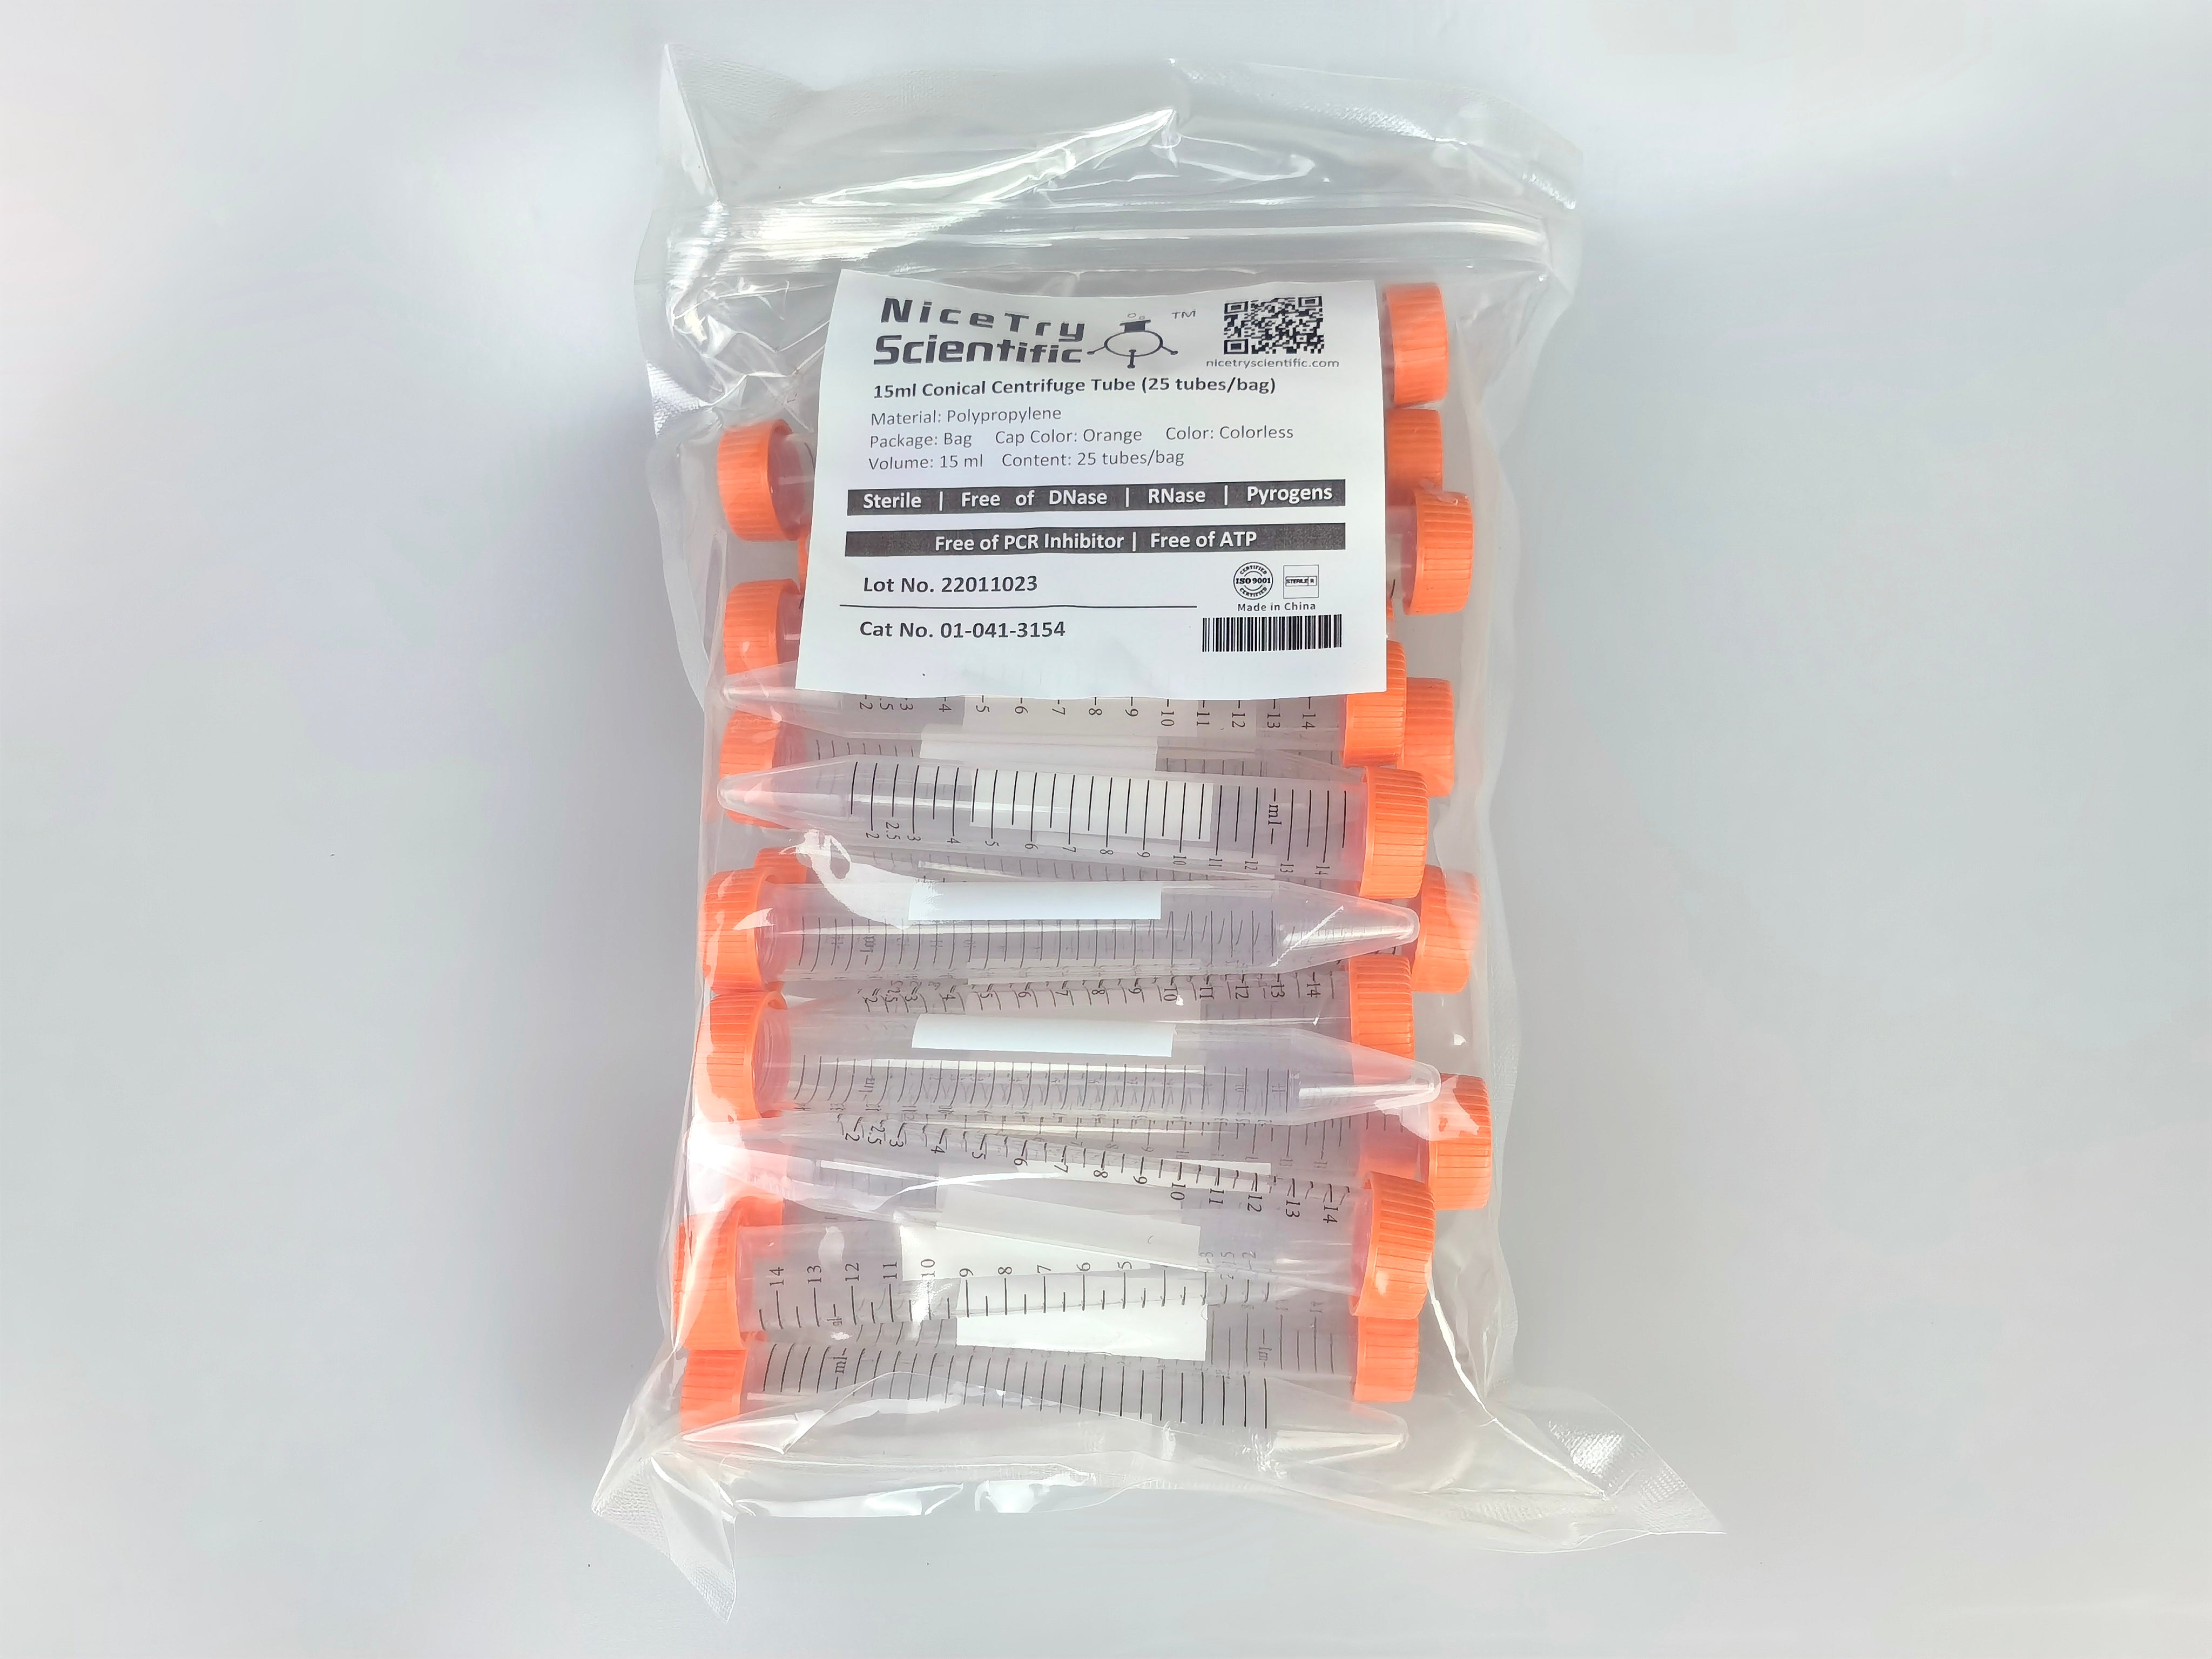 15mL Conical Centrifuge Tubes (in bag)